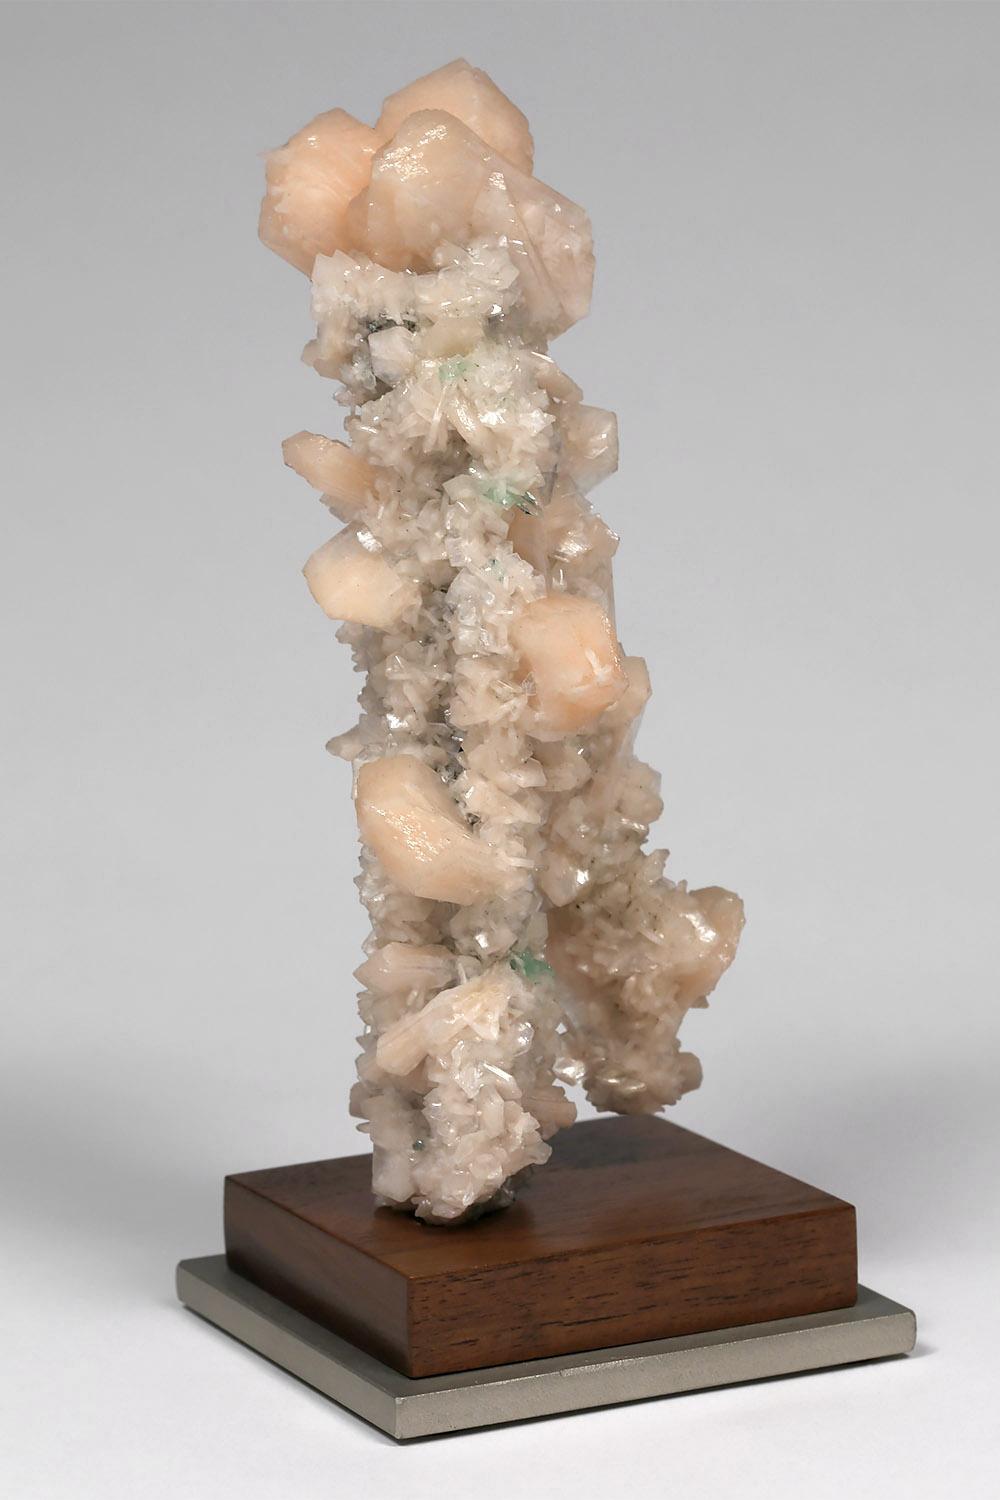 Naturally-Formed Mineral: Peach Stilbite on Apophyllite sculpture

A mineral specimen in the form of an abstract walking figure. Mounted on a custom teak and satin nickel painted steel base.

Measures: Height on custom display stand 7.5 in. / 19